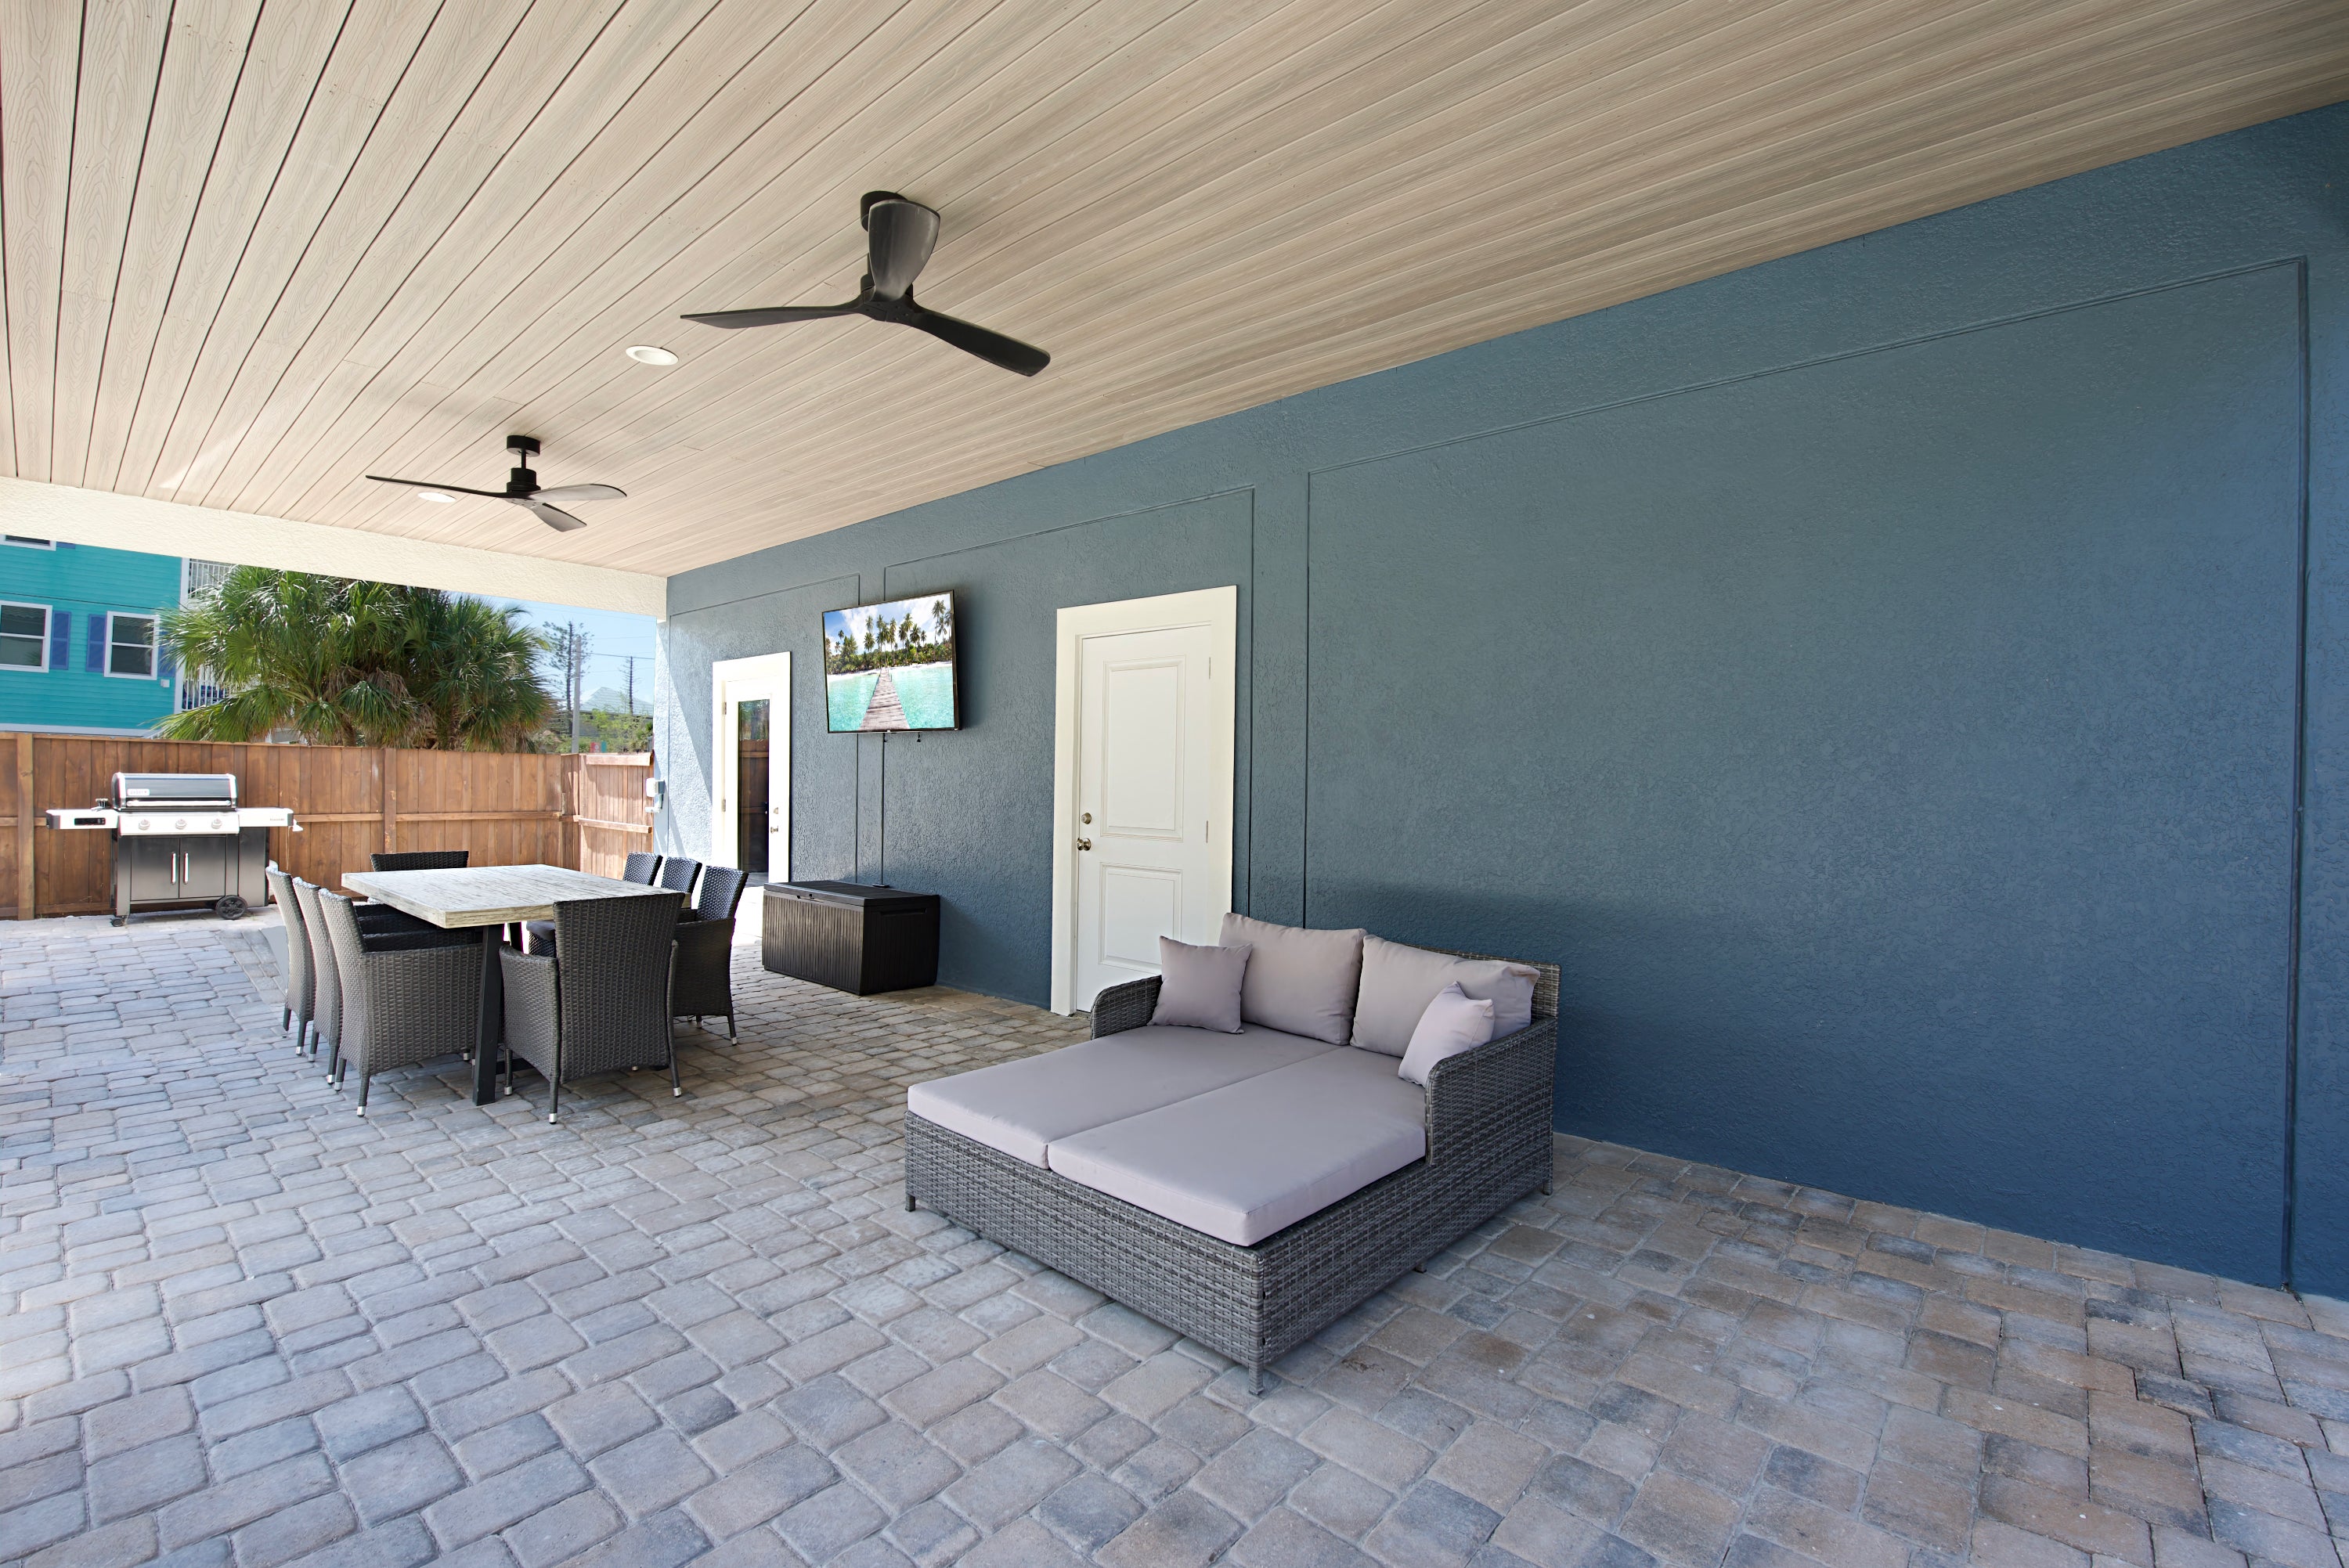 Seating and outdoor dining in patio area